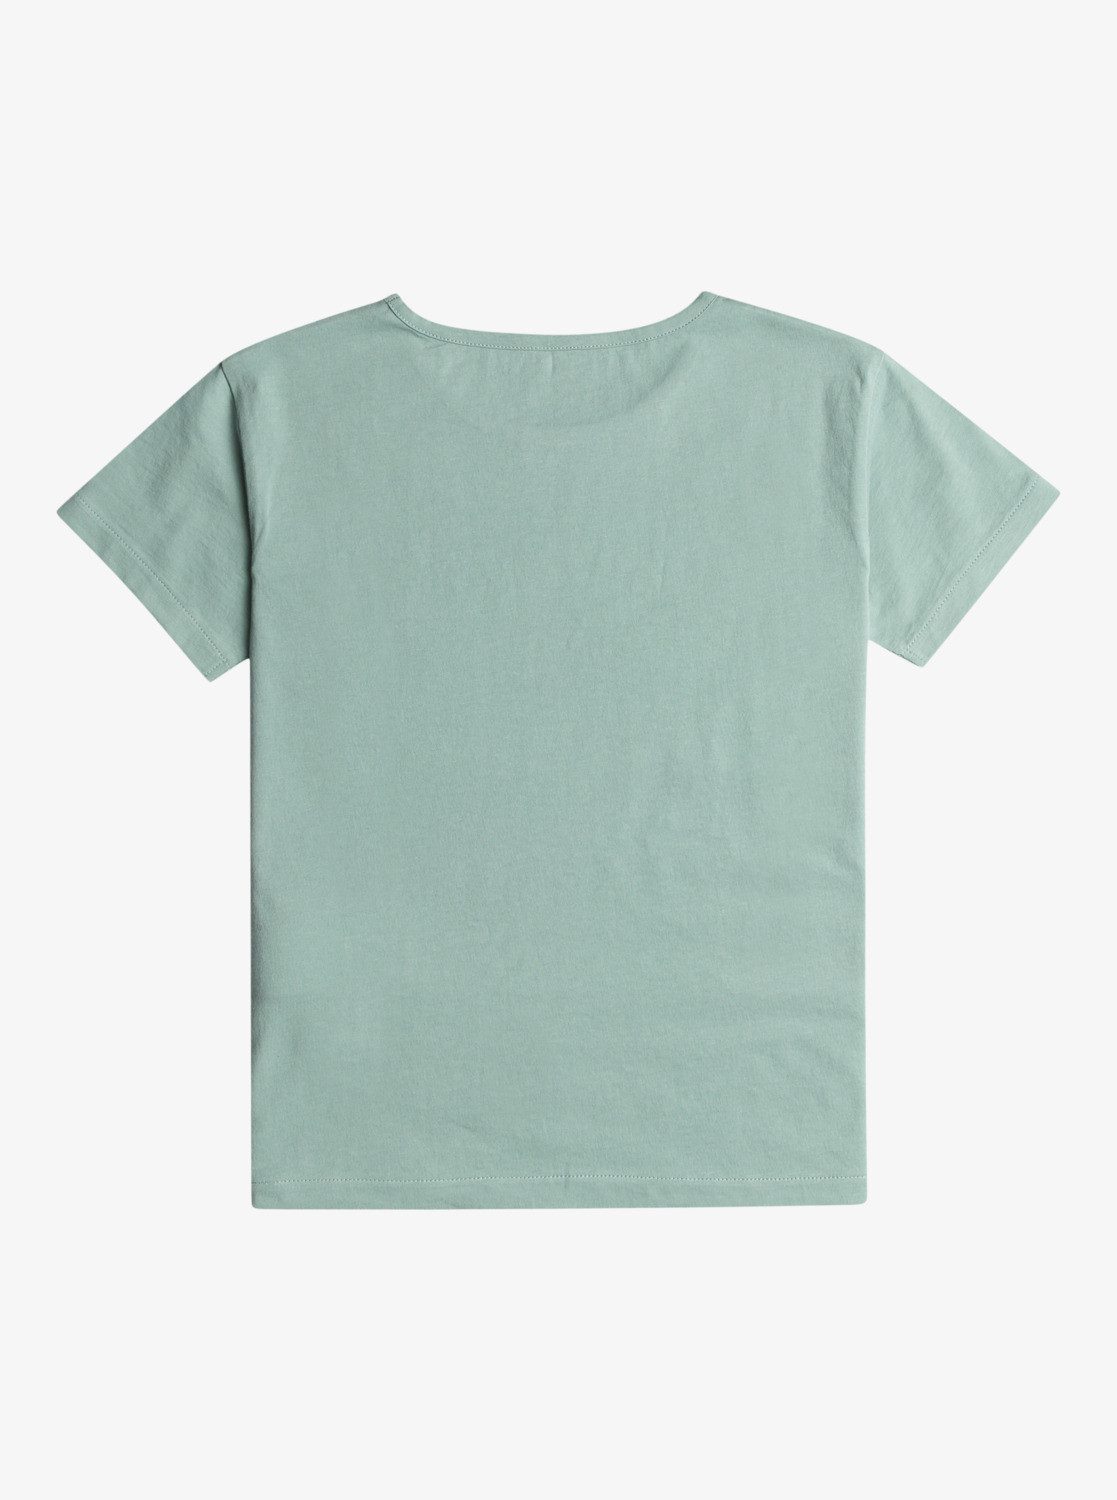 And Day Blue Surf T-Shirt Roxy Night A